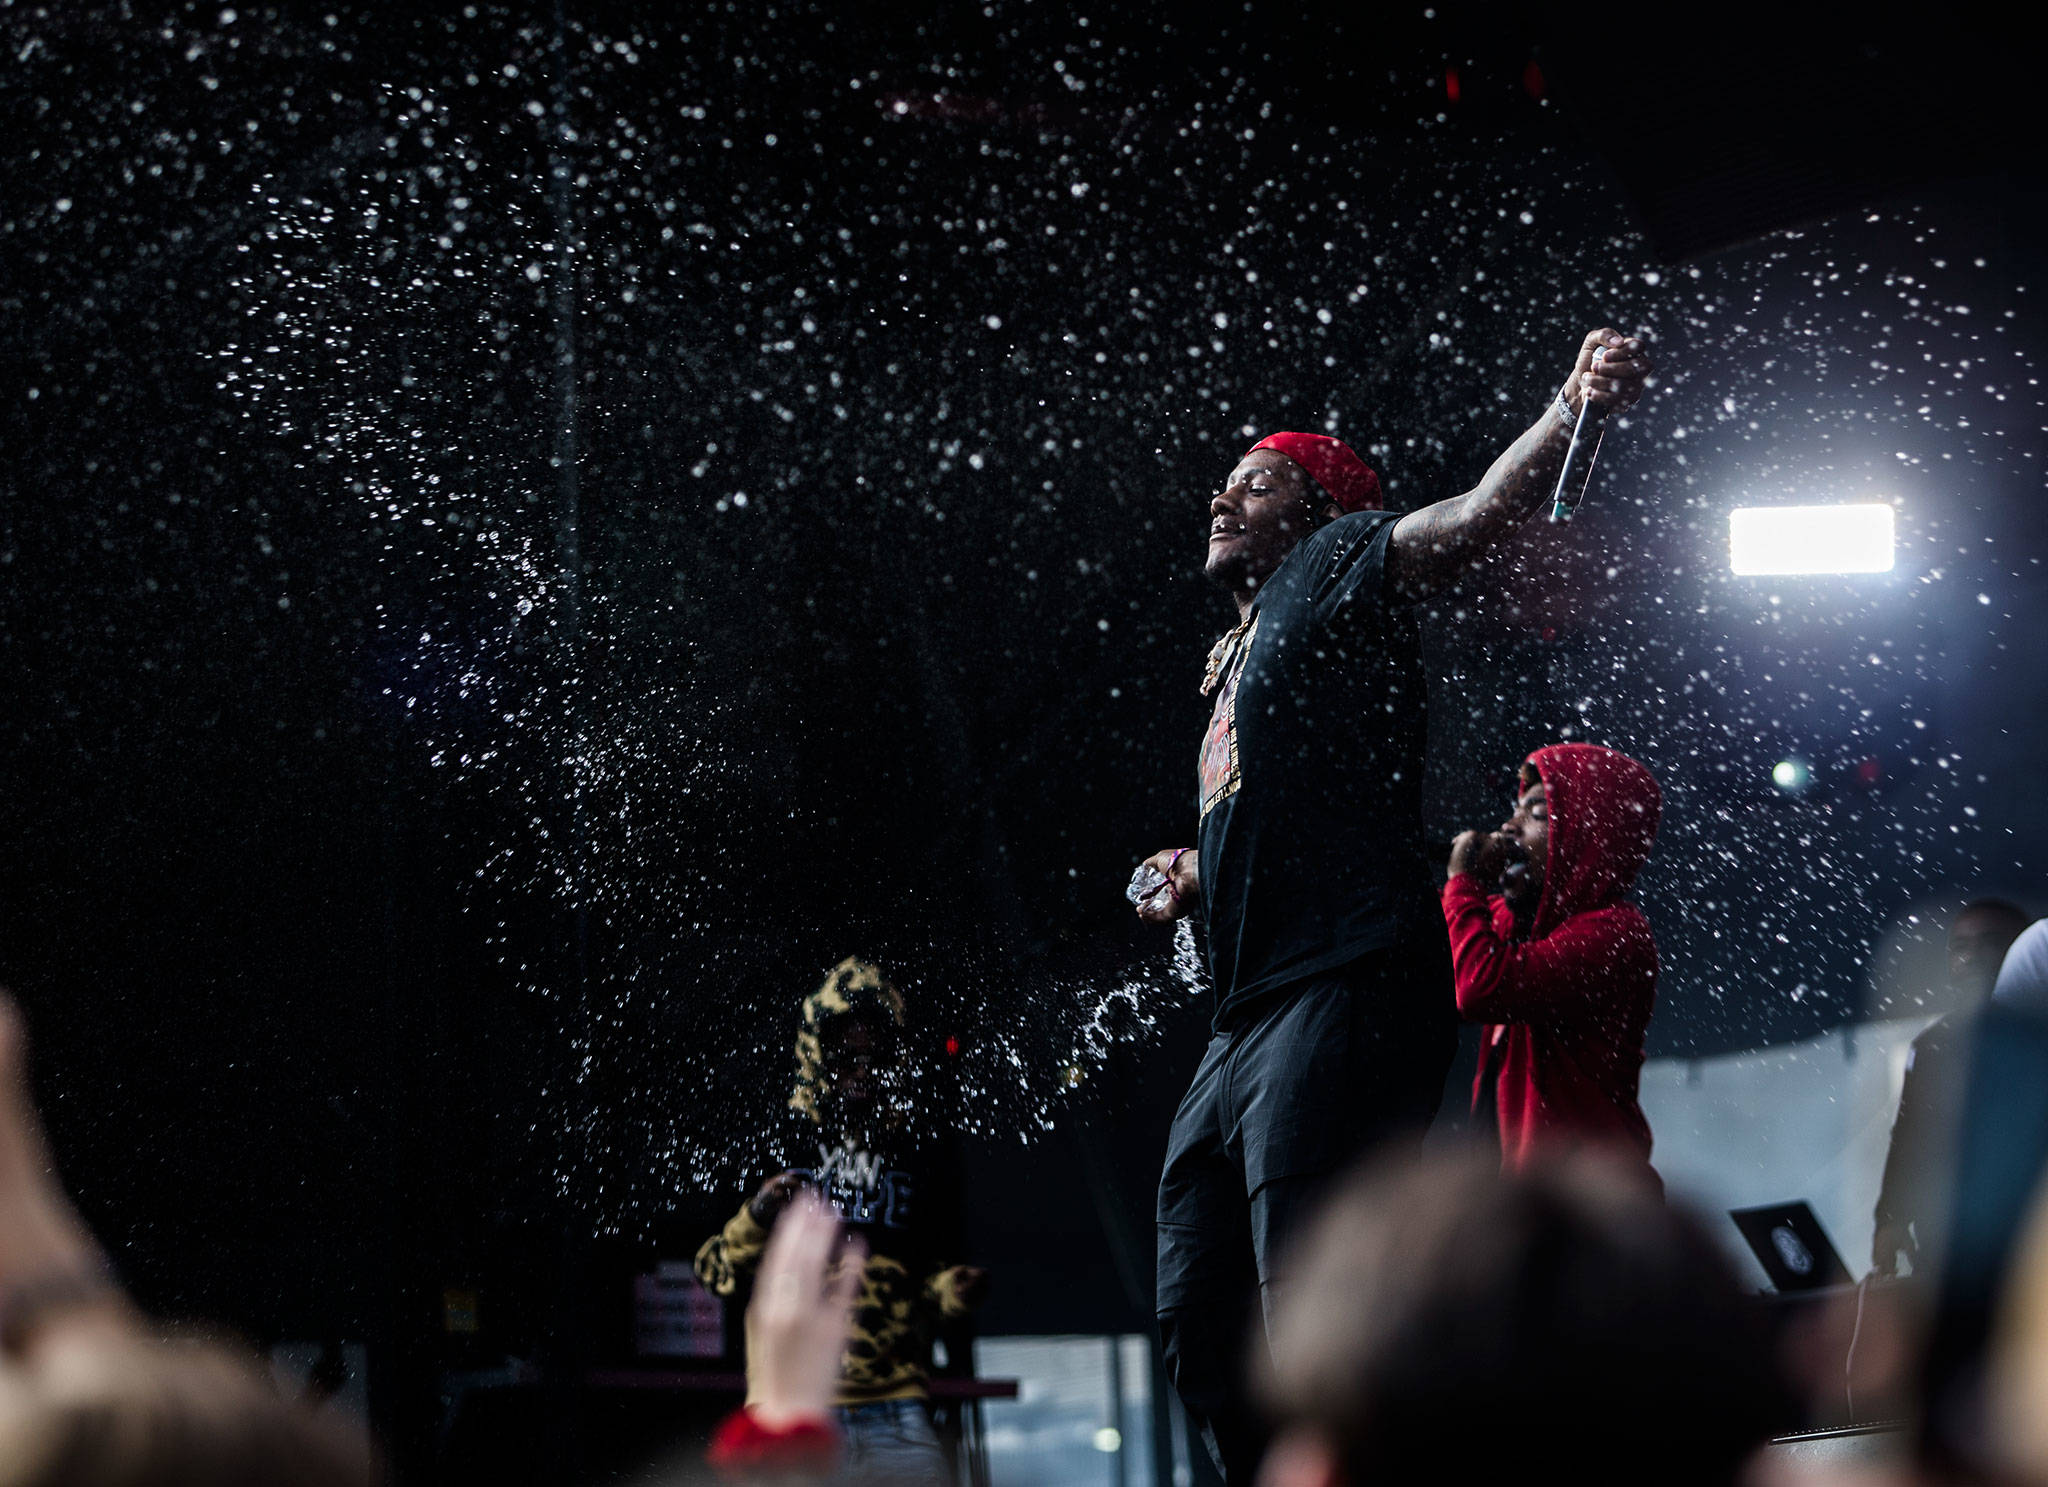 SOBxRBE sprays the crowd with water during their performance at Bumbershoot Music & Arts Festival on Friday, Aug. 30, 2019 in Seattle, Wash. (Olivia Vanni / The Herald)